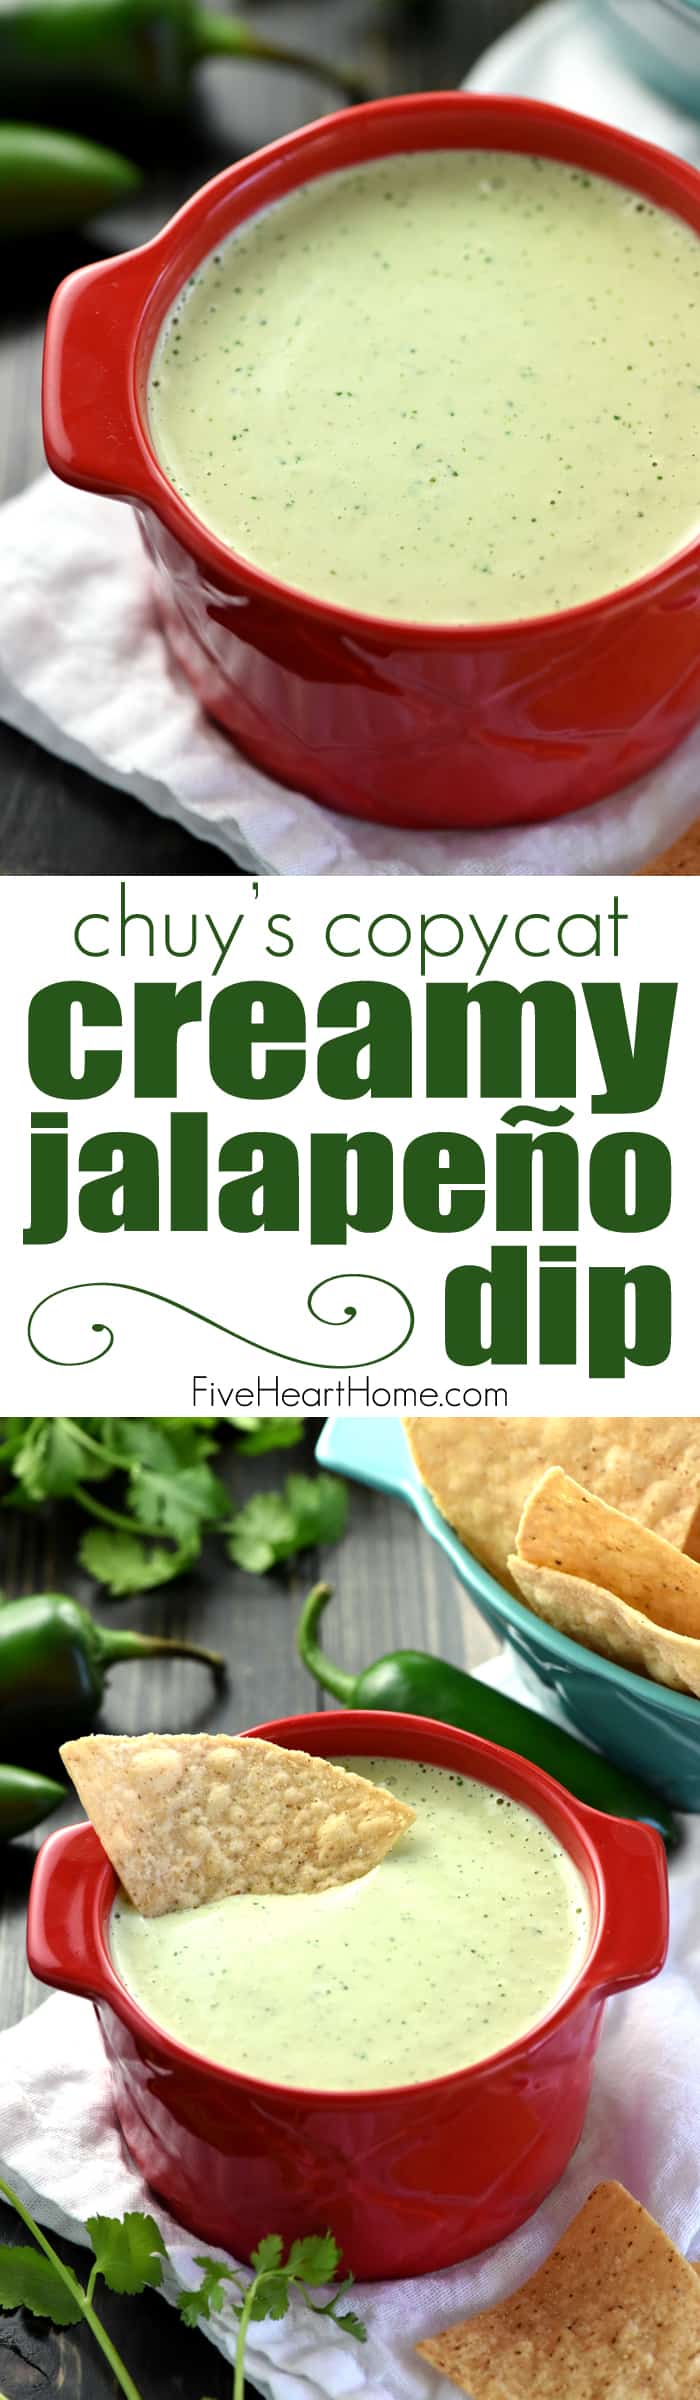 Creamy Jalapeño Dip ~ a base of homemade ranch dressing is flavored with fresh jalapeños, cilantro, and tomatillo salsa in this addictive copycat recipe of the popular appetizer at Chuy's! | FiveHeartHome.com via @fivehearthome